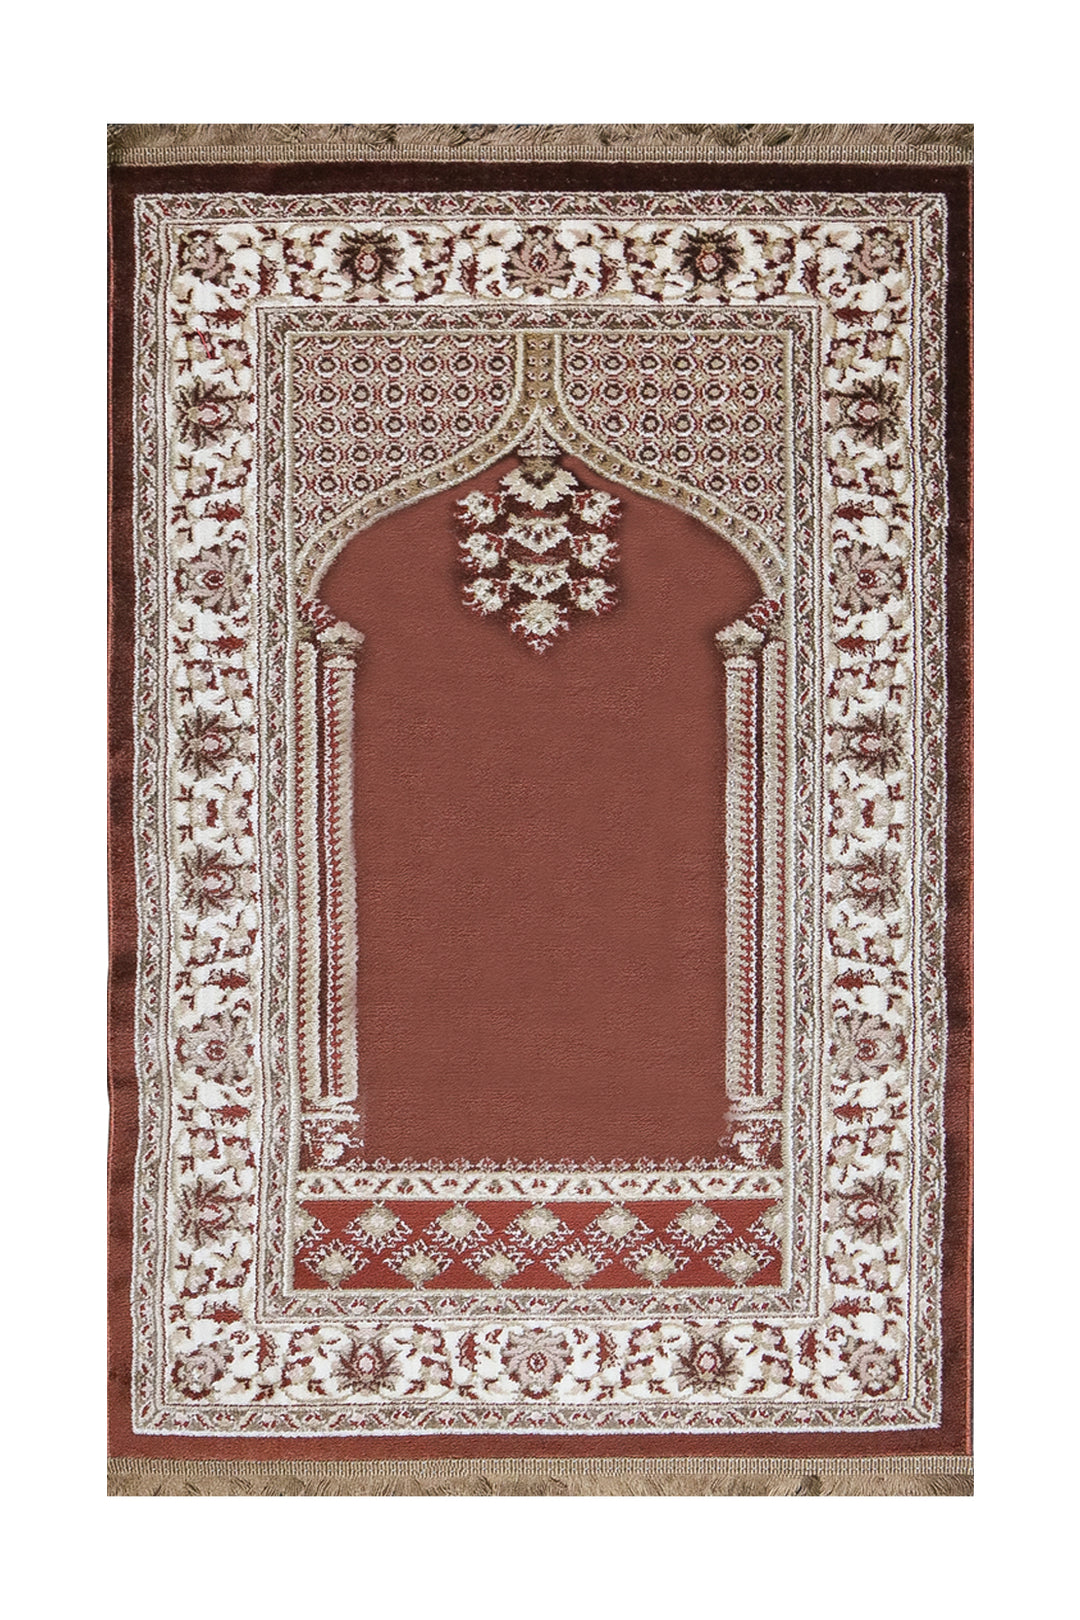 Turkish Style Acrylic Sajjadeh Prayers Mat -Red - Soft, Durable, and Easy to Clean